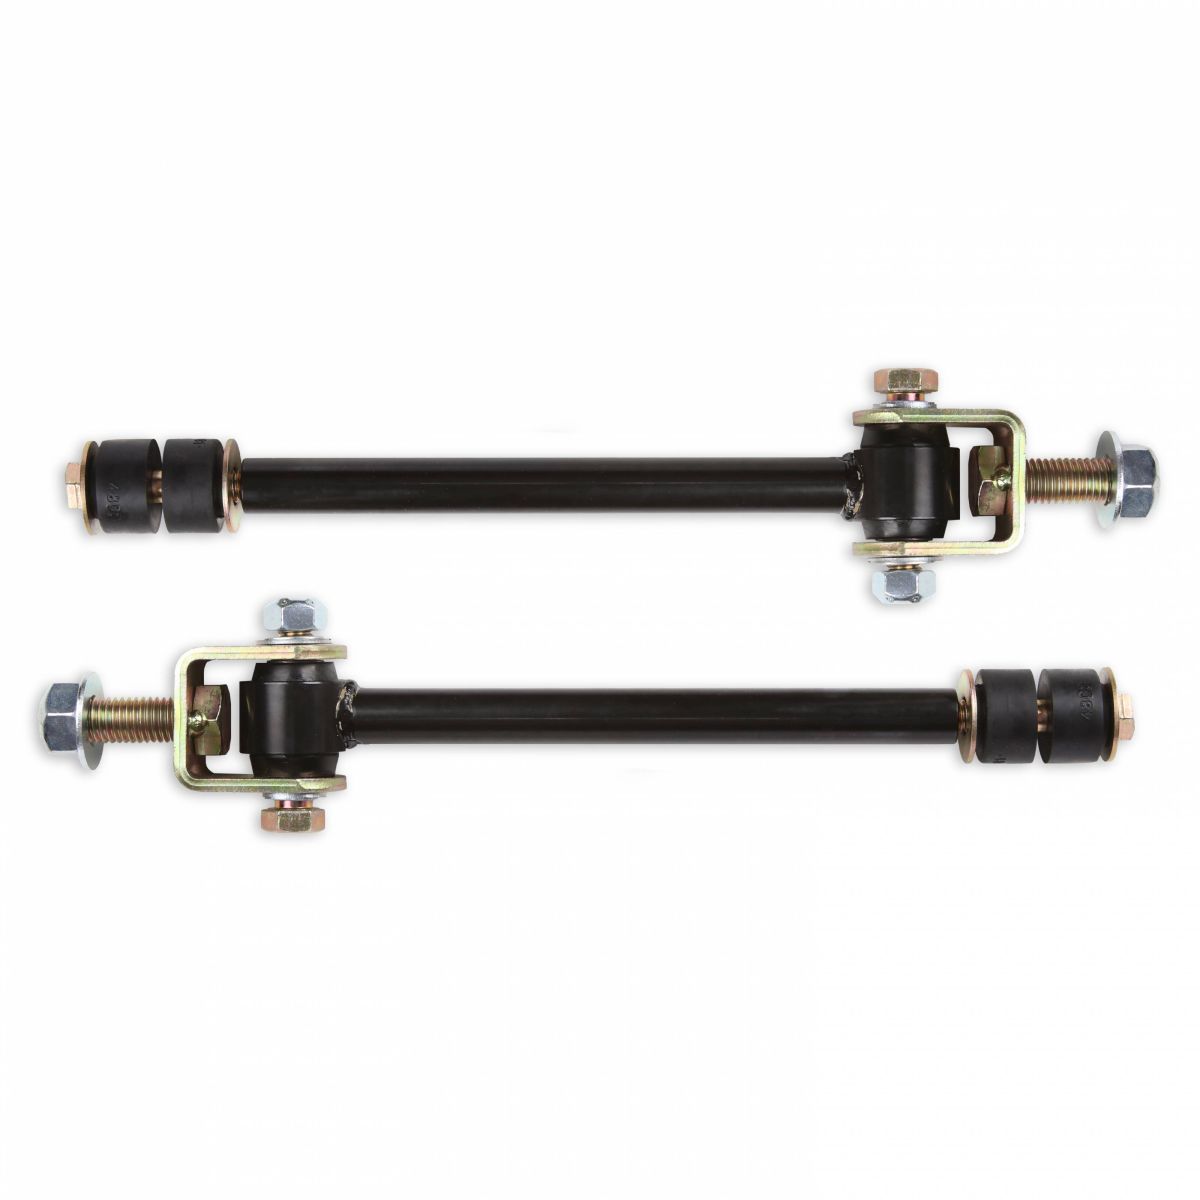 Cognito Motorsports - Cognito Heavy-Duty Front Sway Bar End Link Kit for 2001-2019 Chevy/GMC 2500/3500